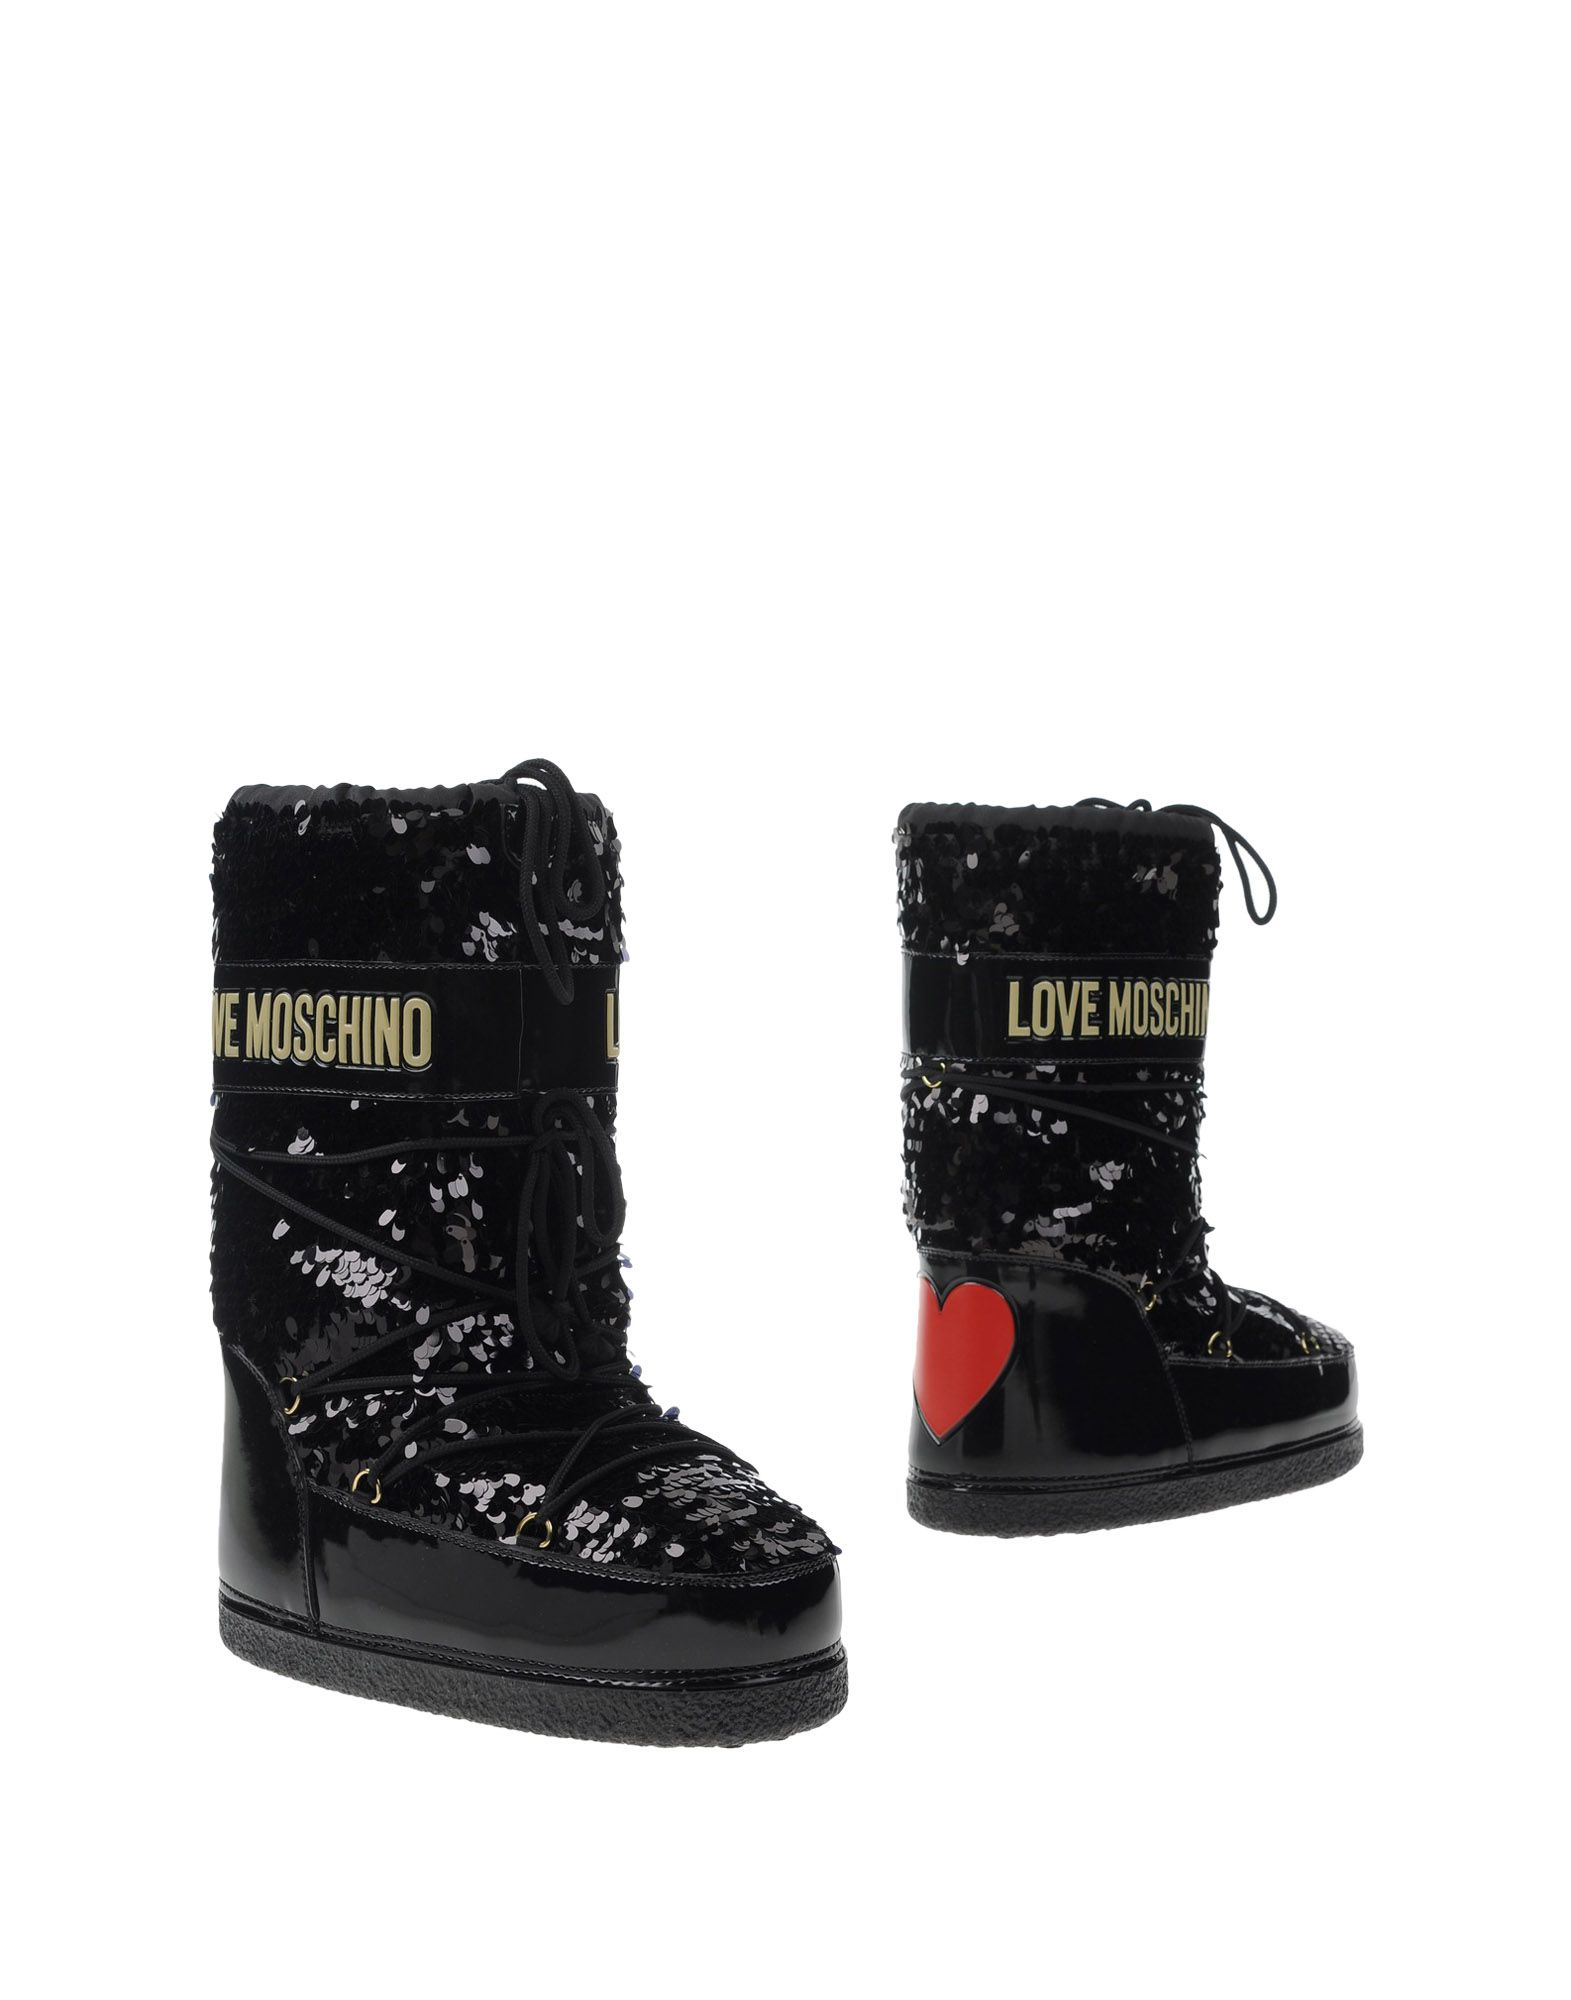 Love Moschino Quilted Faux-Leather Boots in Black - Lyst